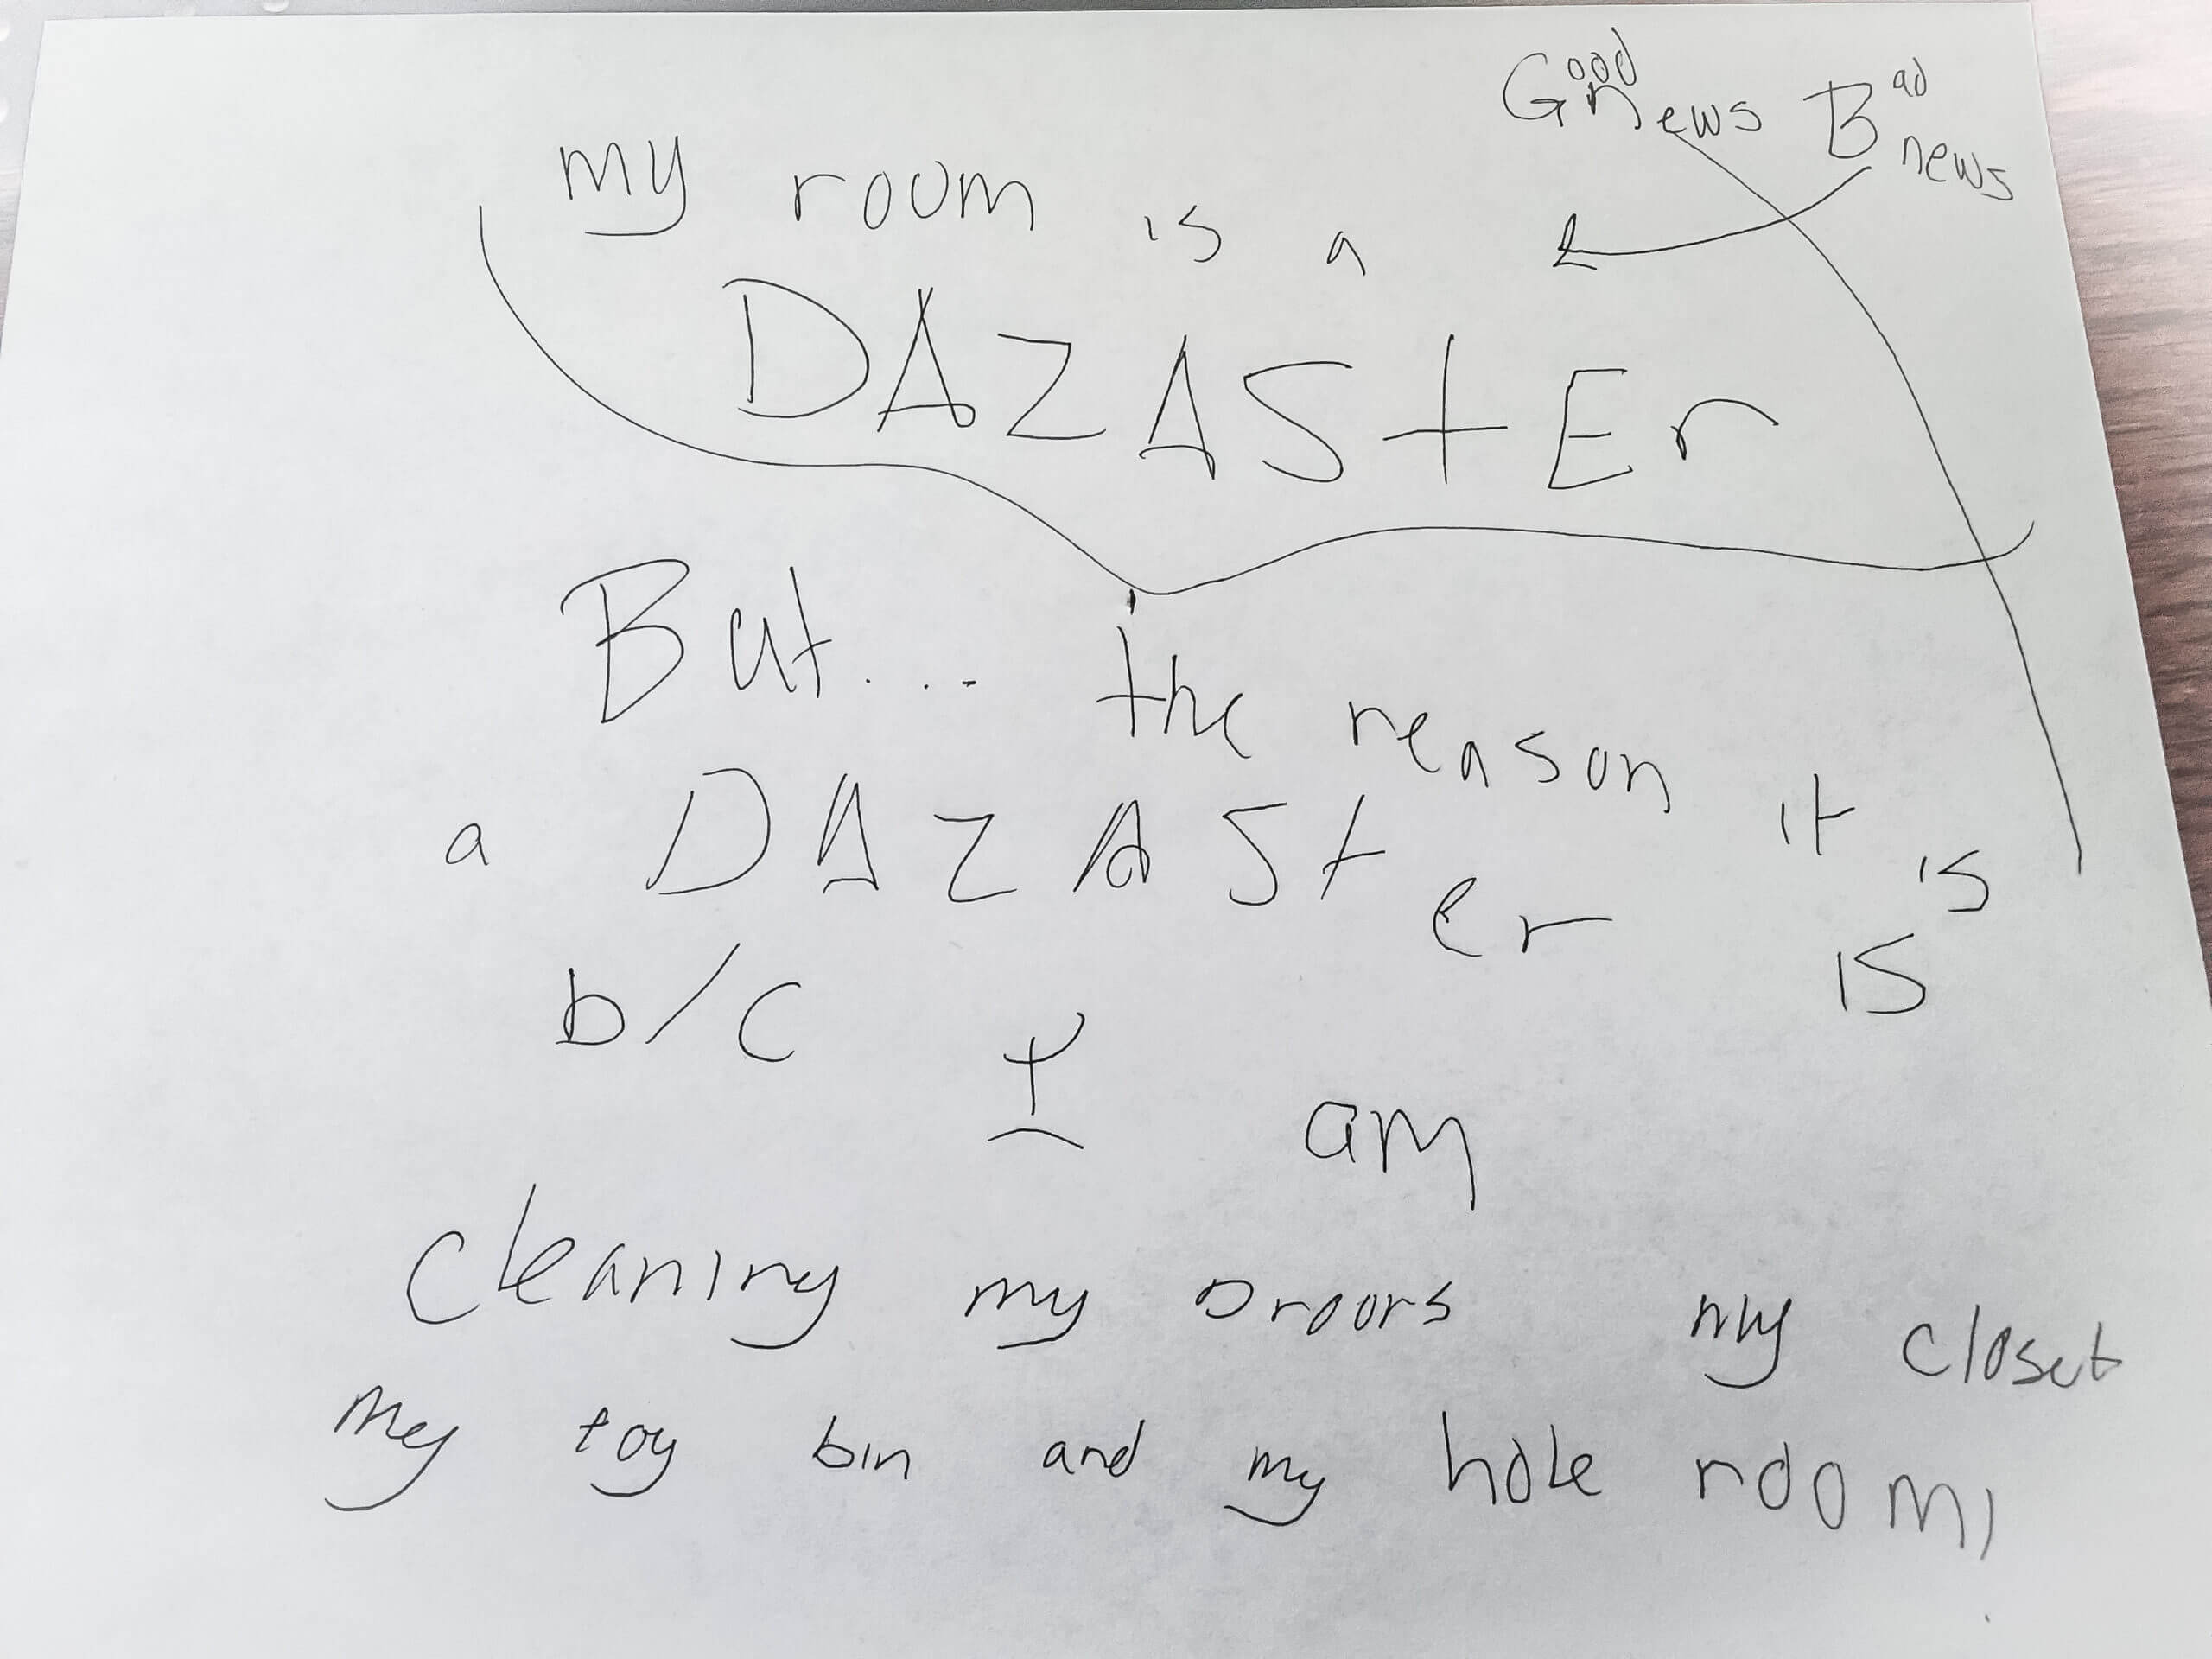 A note on white paper in children's handwriting with the word disaster spelled with a "z". The note reads, "Good new, bad news. My room is a disaster but the reason it is a disaster is because I am cleaning my closet, my toy bin and my whole room."